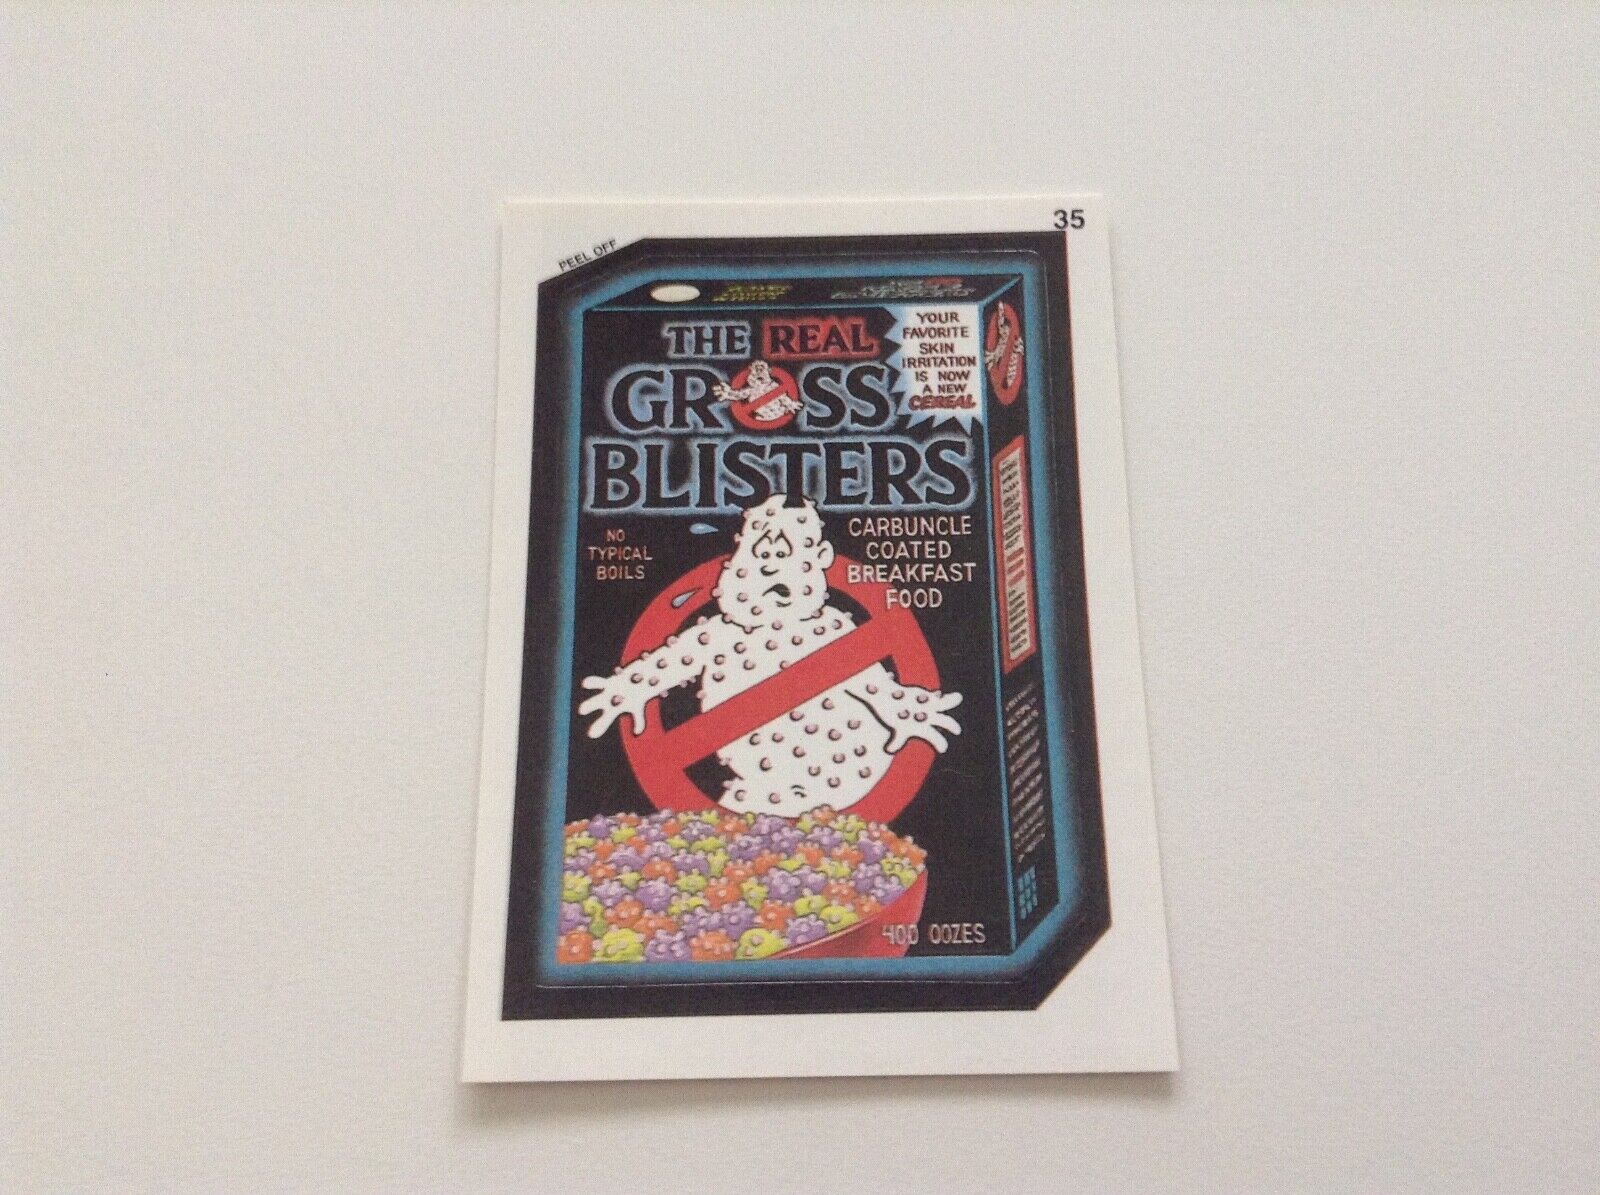 GHOSTBUSTERS CEREAL 1991 TOPPS WACKY PACKAGES PARODY CARD #35, GROSS BLISTERS NM